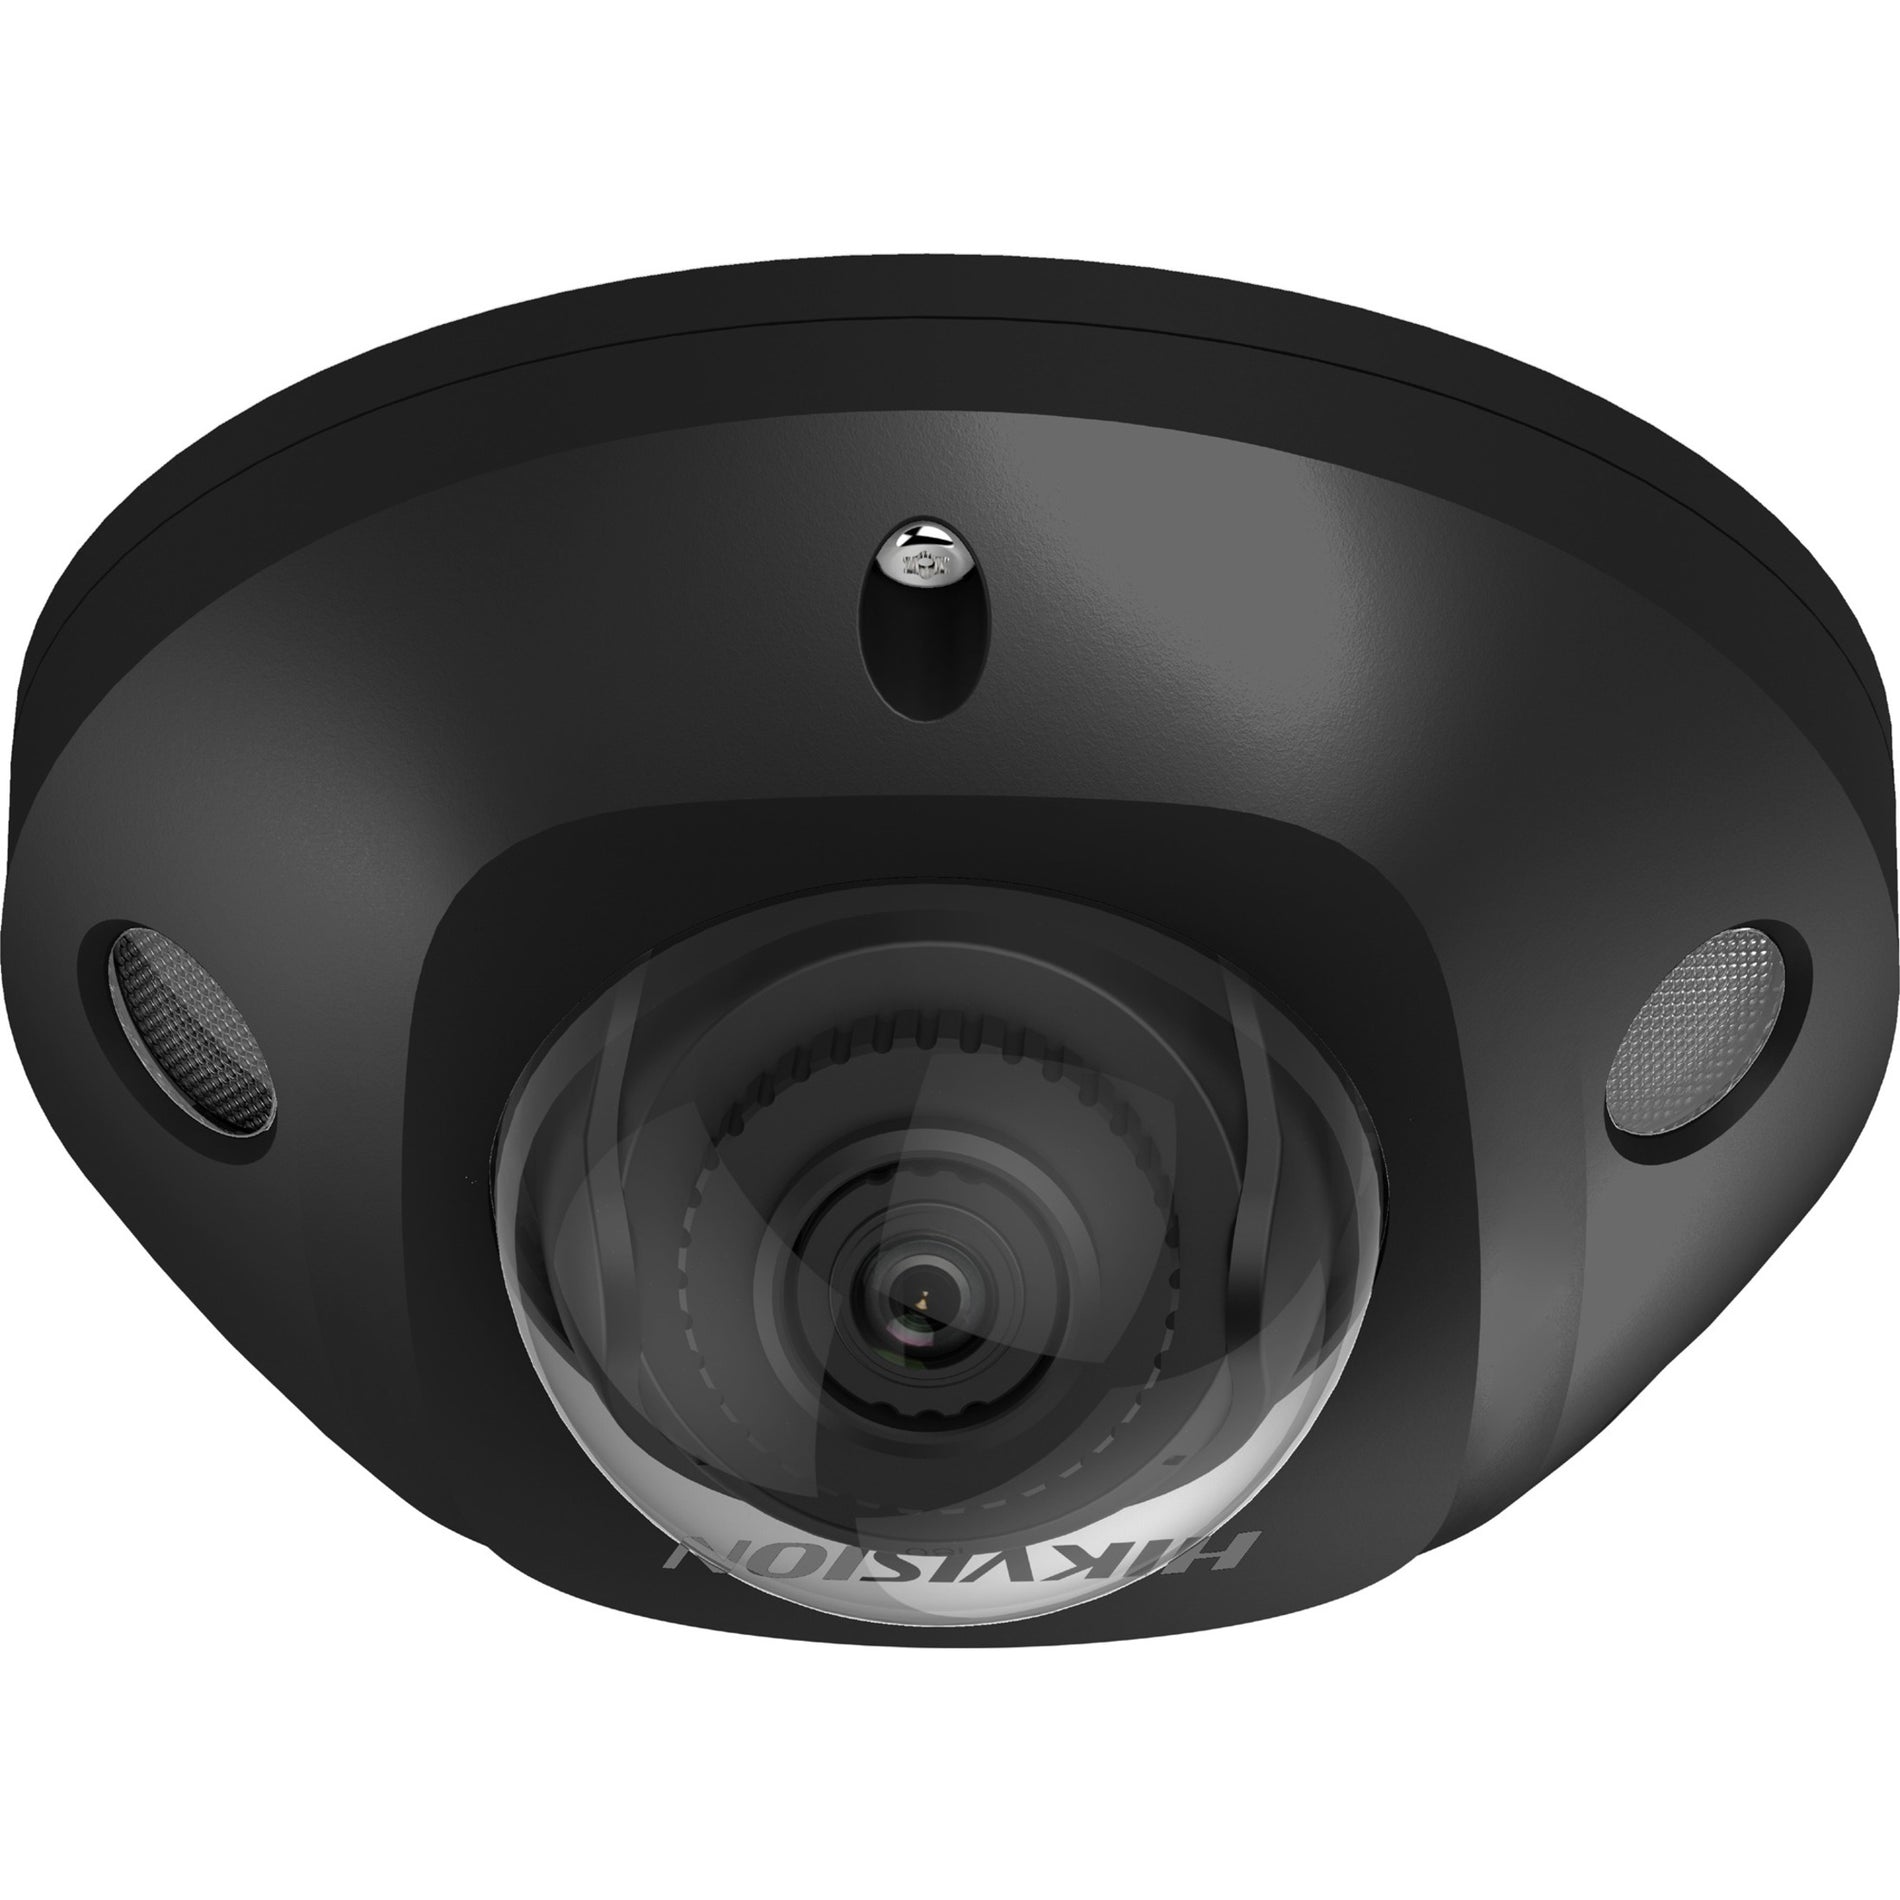 Hikvision DS-2CD2543G2-IS 4MM AcuSense 4 MP Built-in Mic Mini Dome Network Camera, 2688 x 1520, 30 fps, IR Night Vision